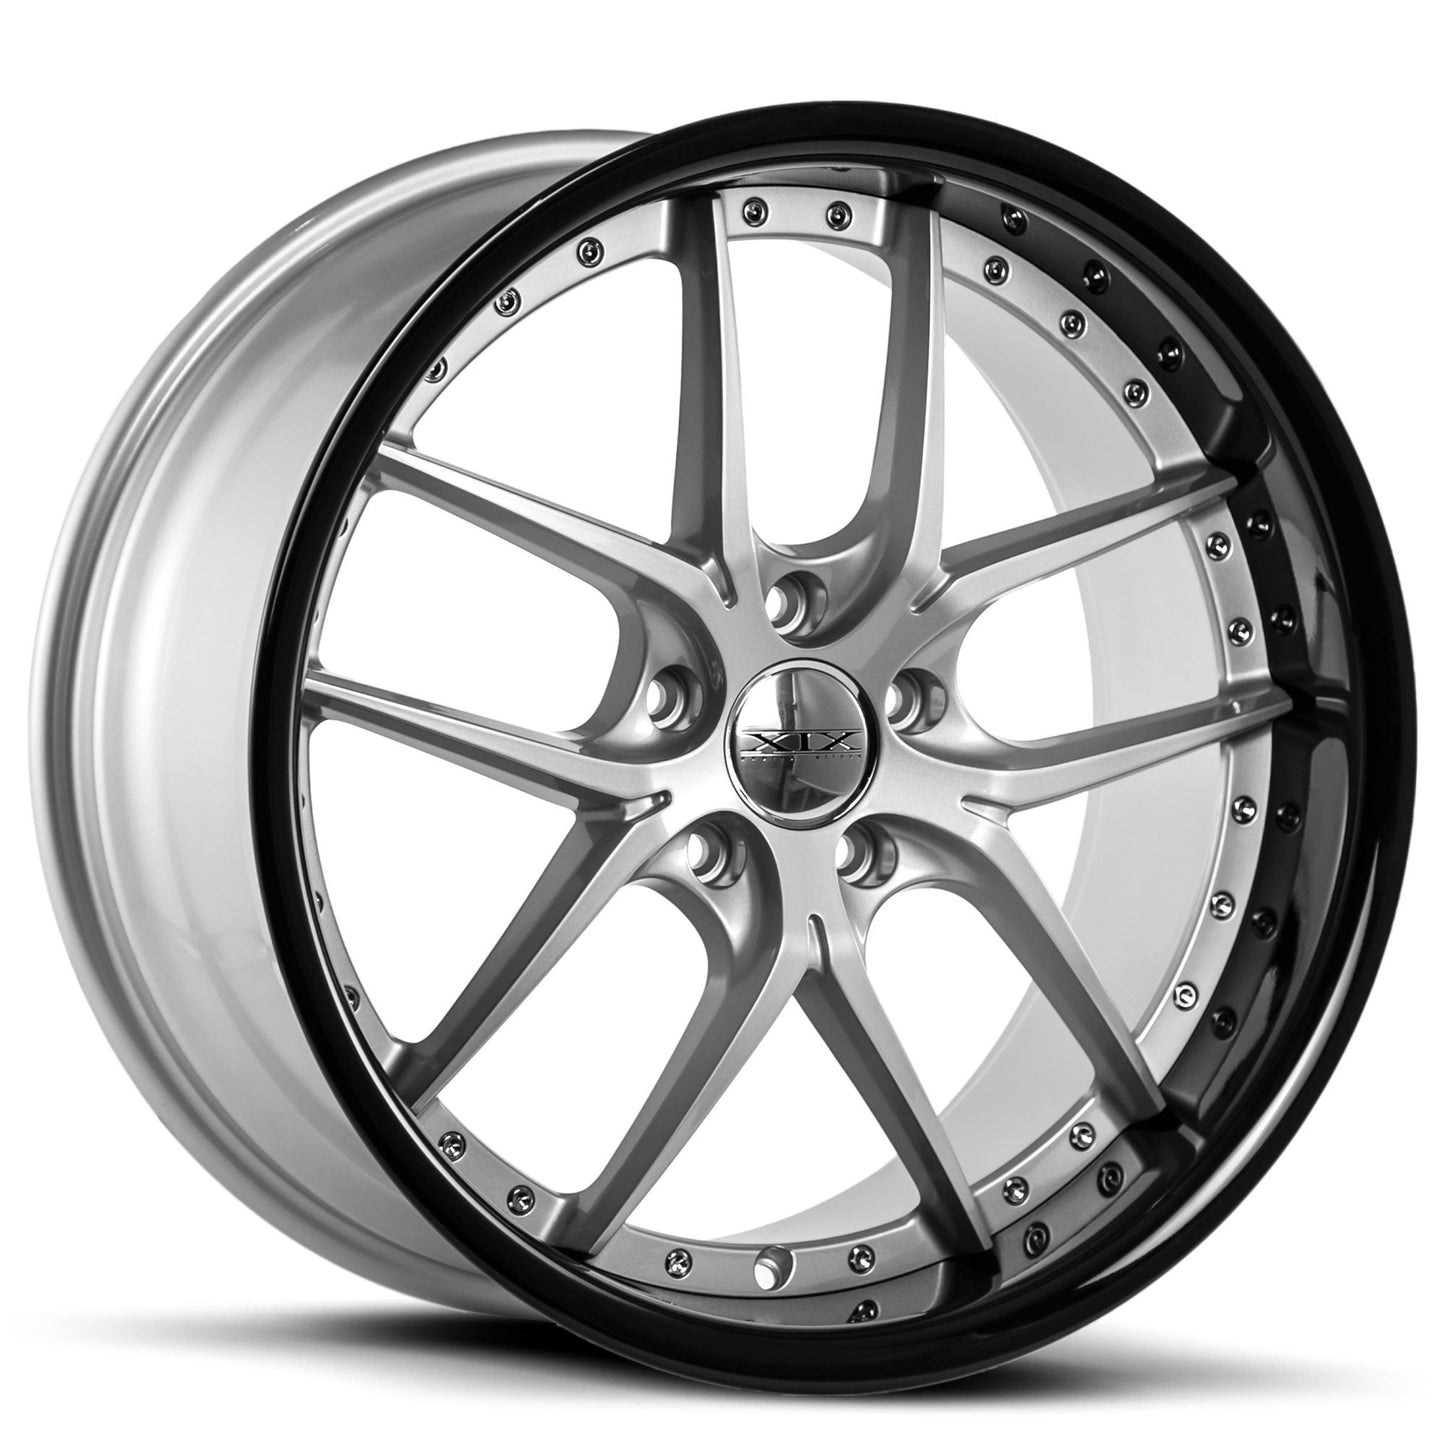 XIX-X61-Silver-Machined-with-Stainless-Steel-Lip-Silver-20x10-72.56-wheels-rims-felger-Felghuset